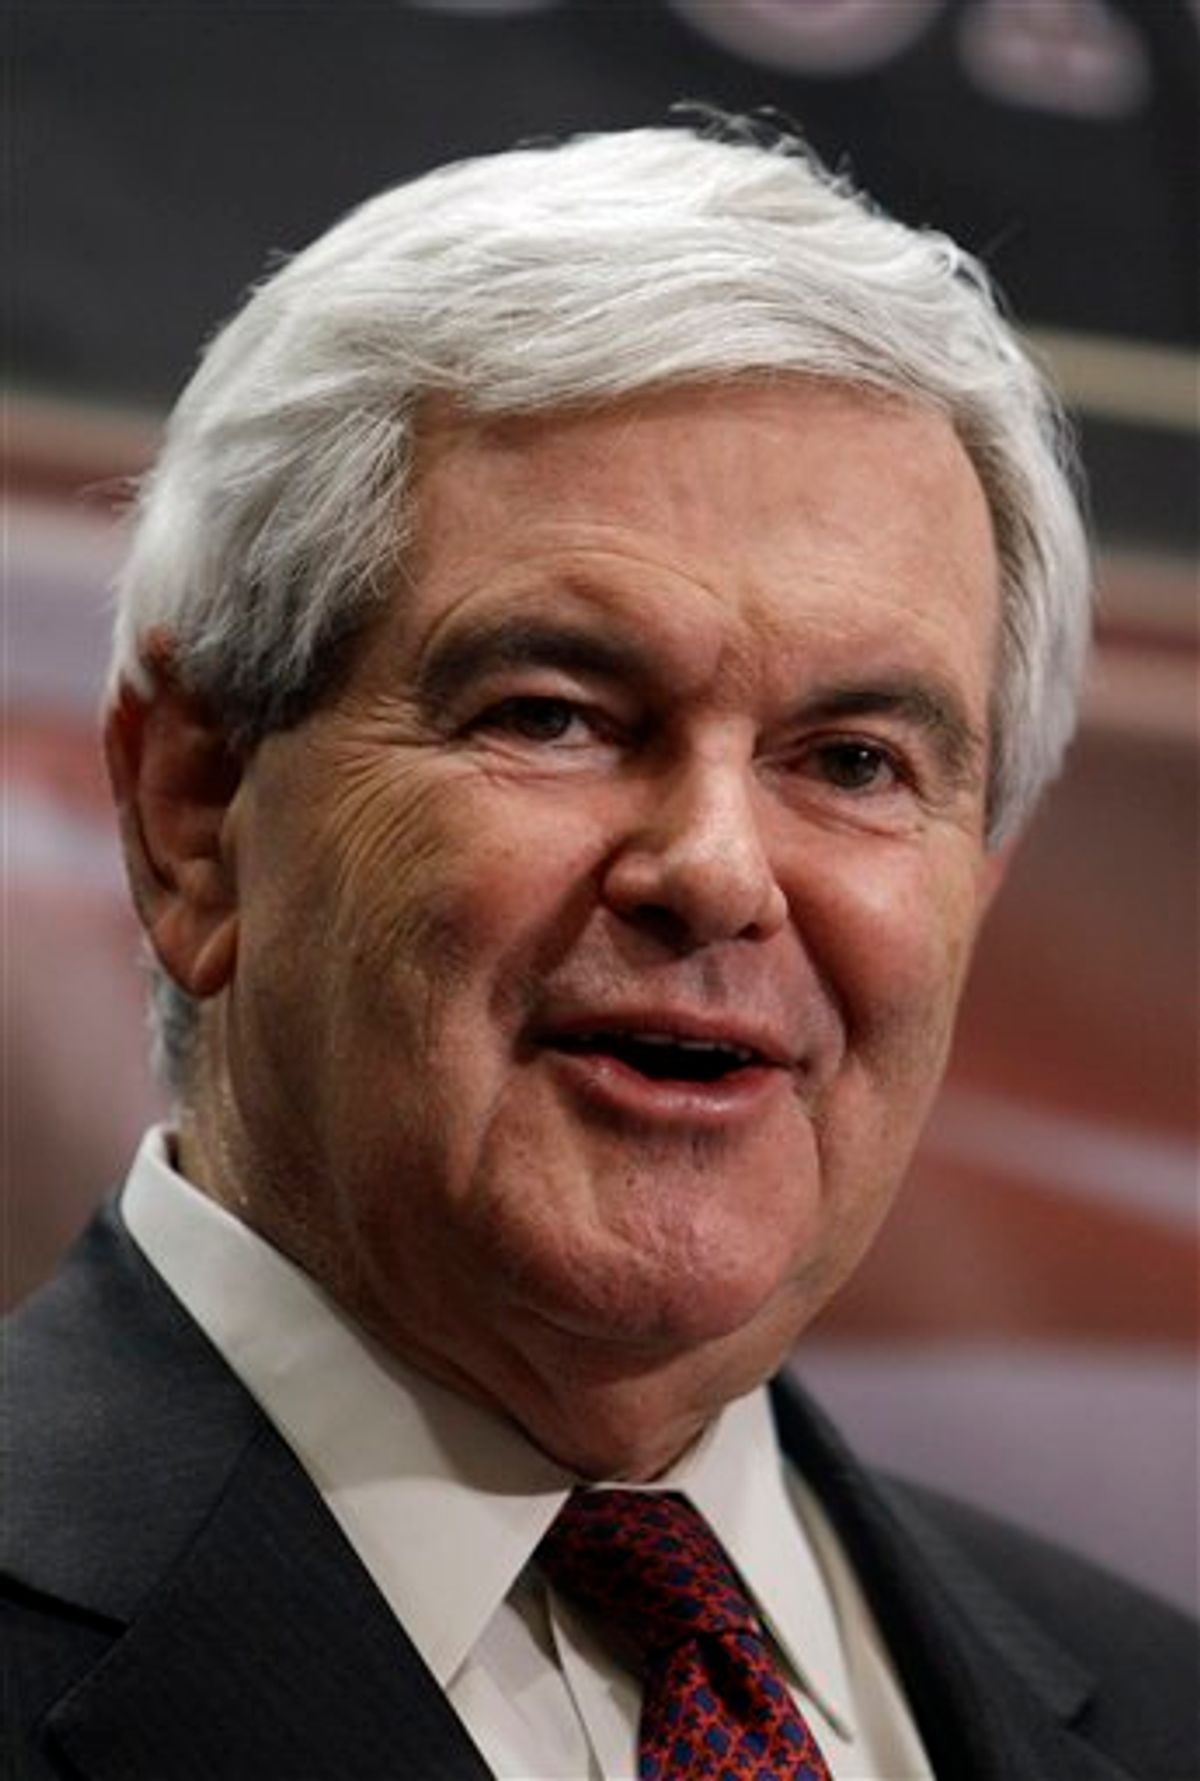 Former House Speaker Newt Gingrich speaks during the Conservative Principles Conference Saturday, March 26, 2011, in Des Moines, Iowa. (AP Photo/Charlie Neibergall) (AP)